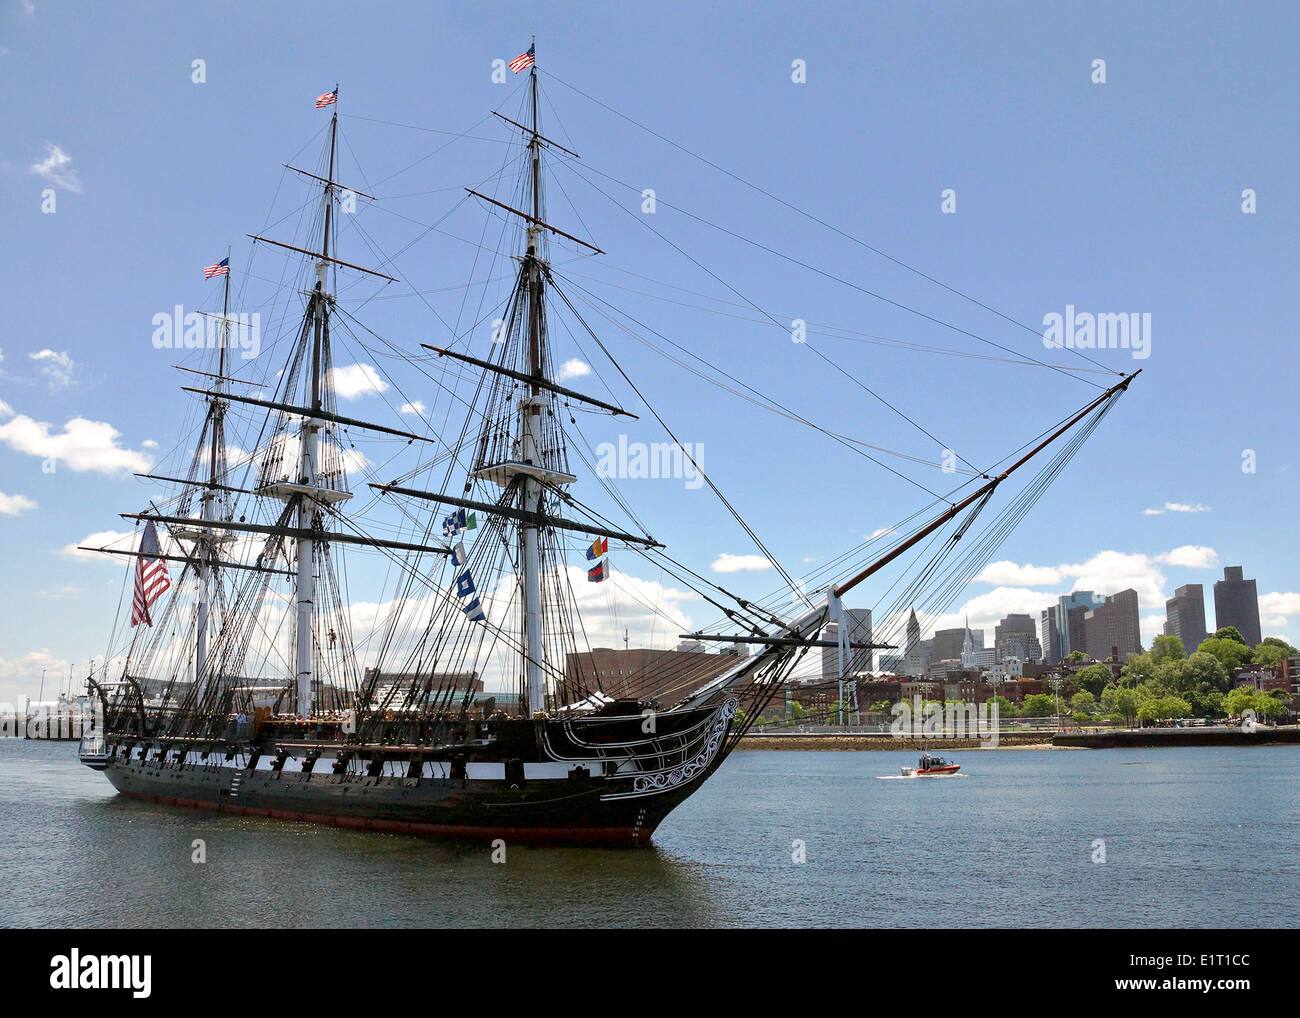 USS Constitution gets underway in Boston Harbor for her spring turnaround cruise with 400 visitors onboard June 6, 2014 in Boston, MA. Stock Photo